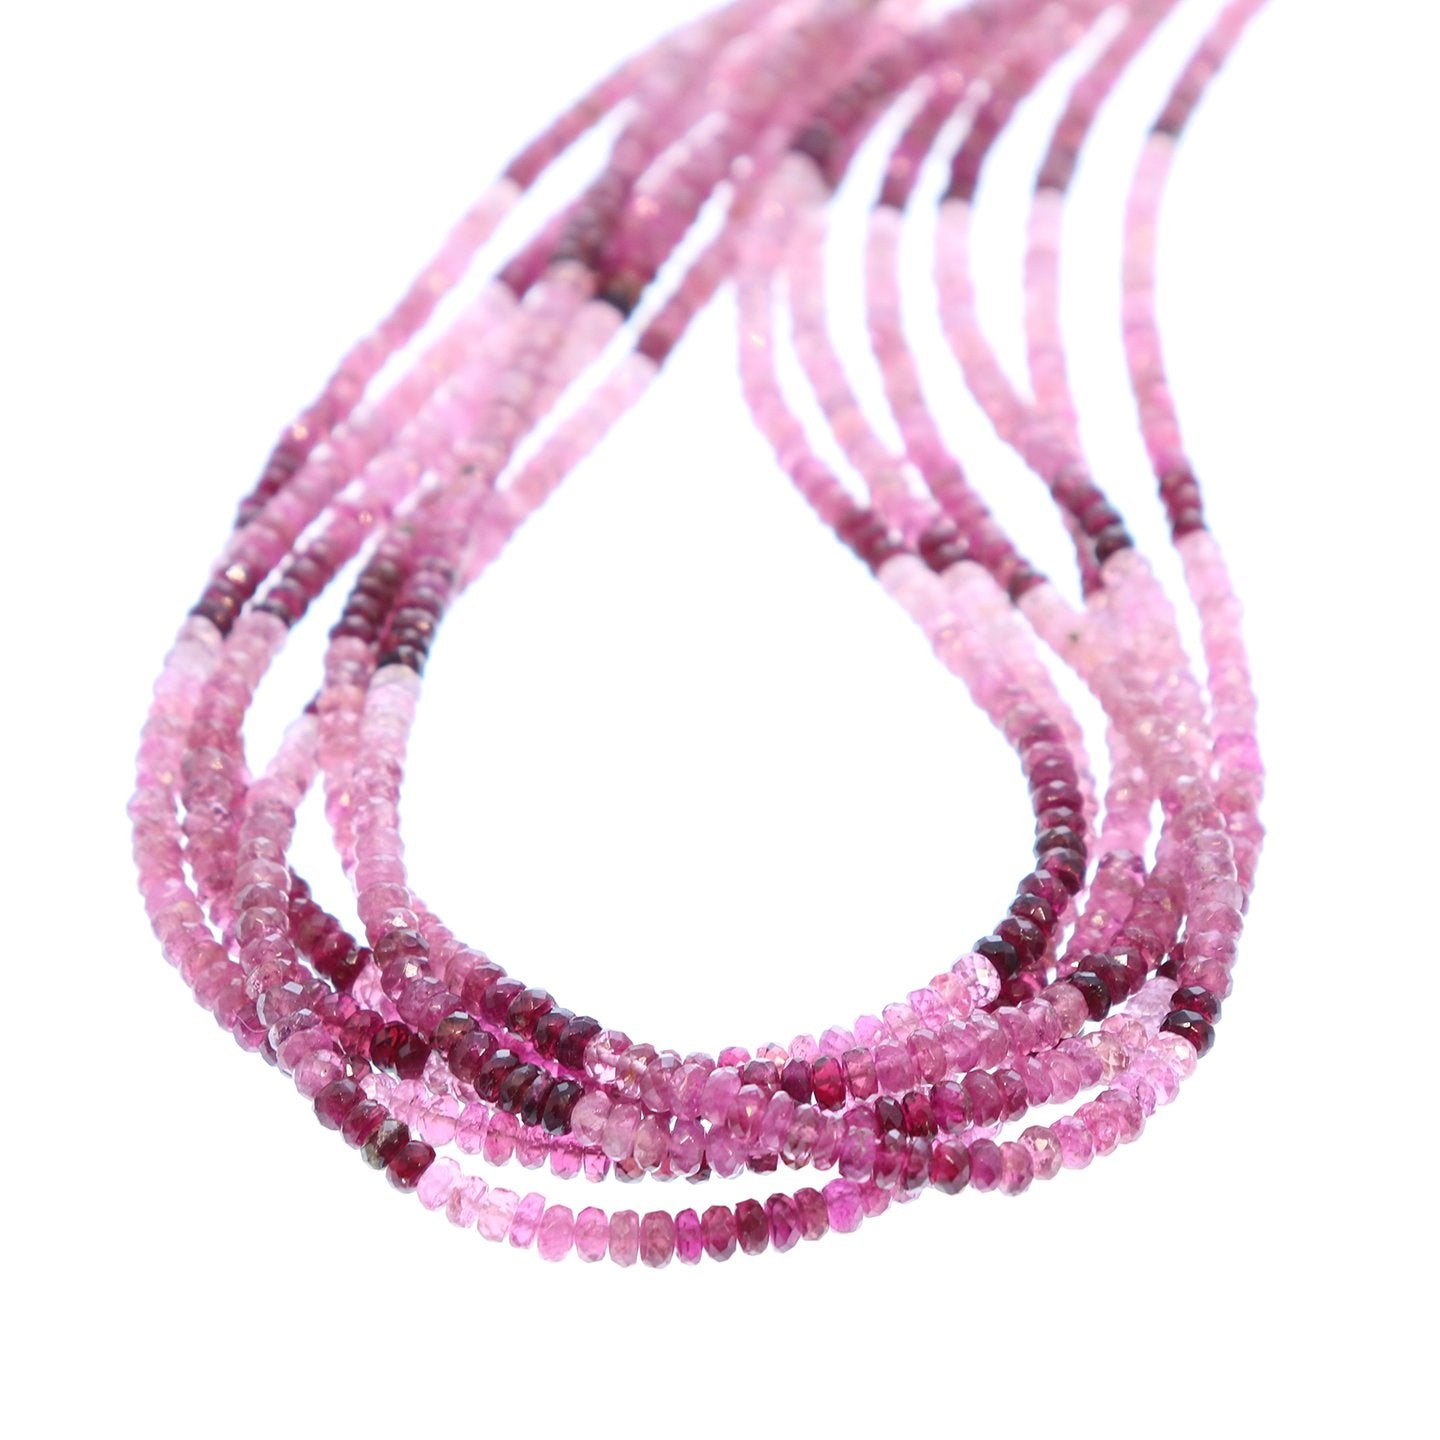 Magenta Tourmaline Faceted Beads 4Mm Rondelles Shaded Colors -NewWorldGems